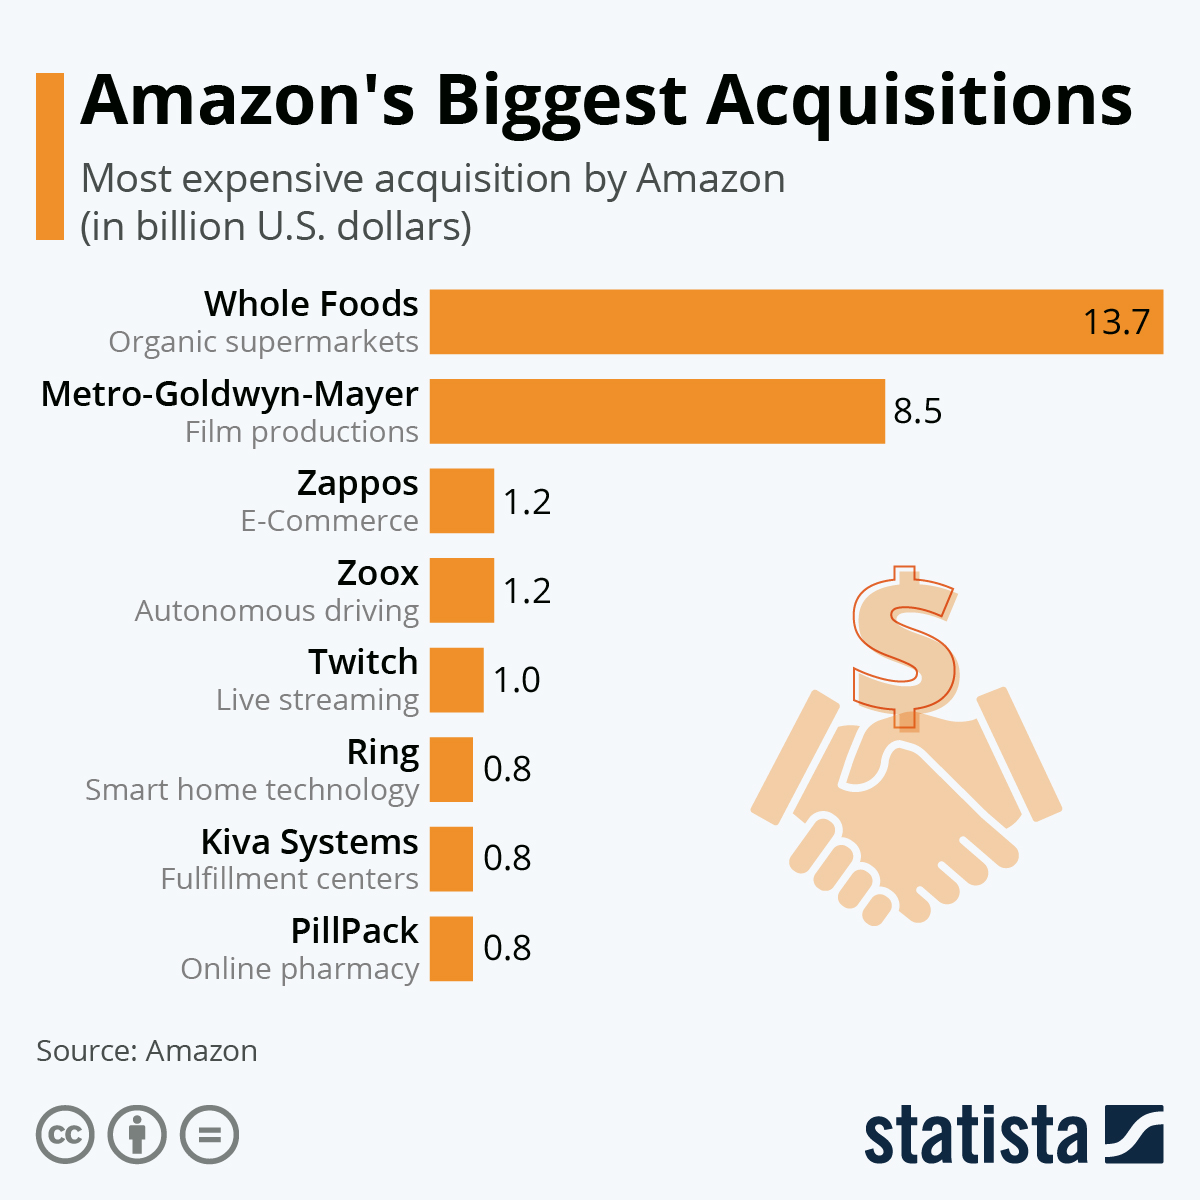 Which are Amazon's biggest acquisitions?